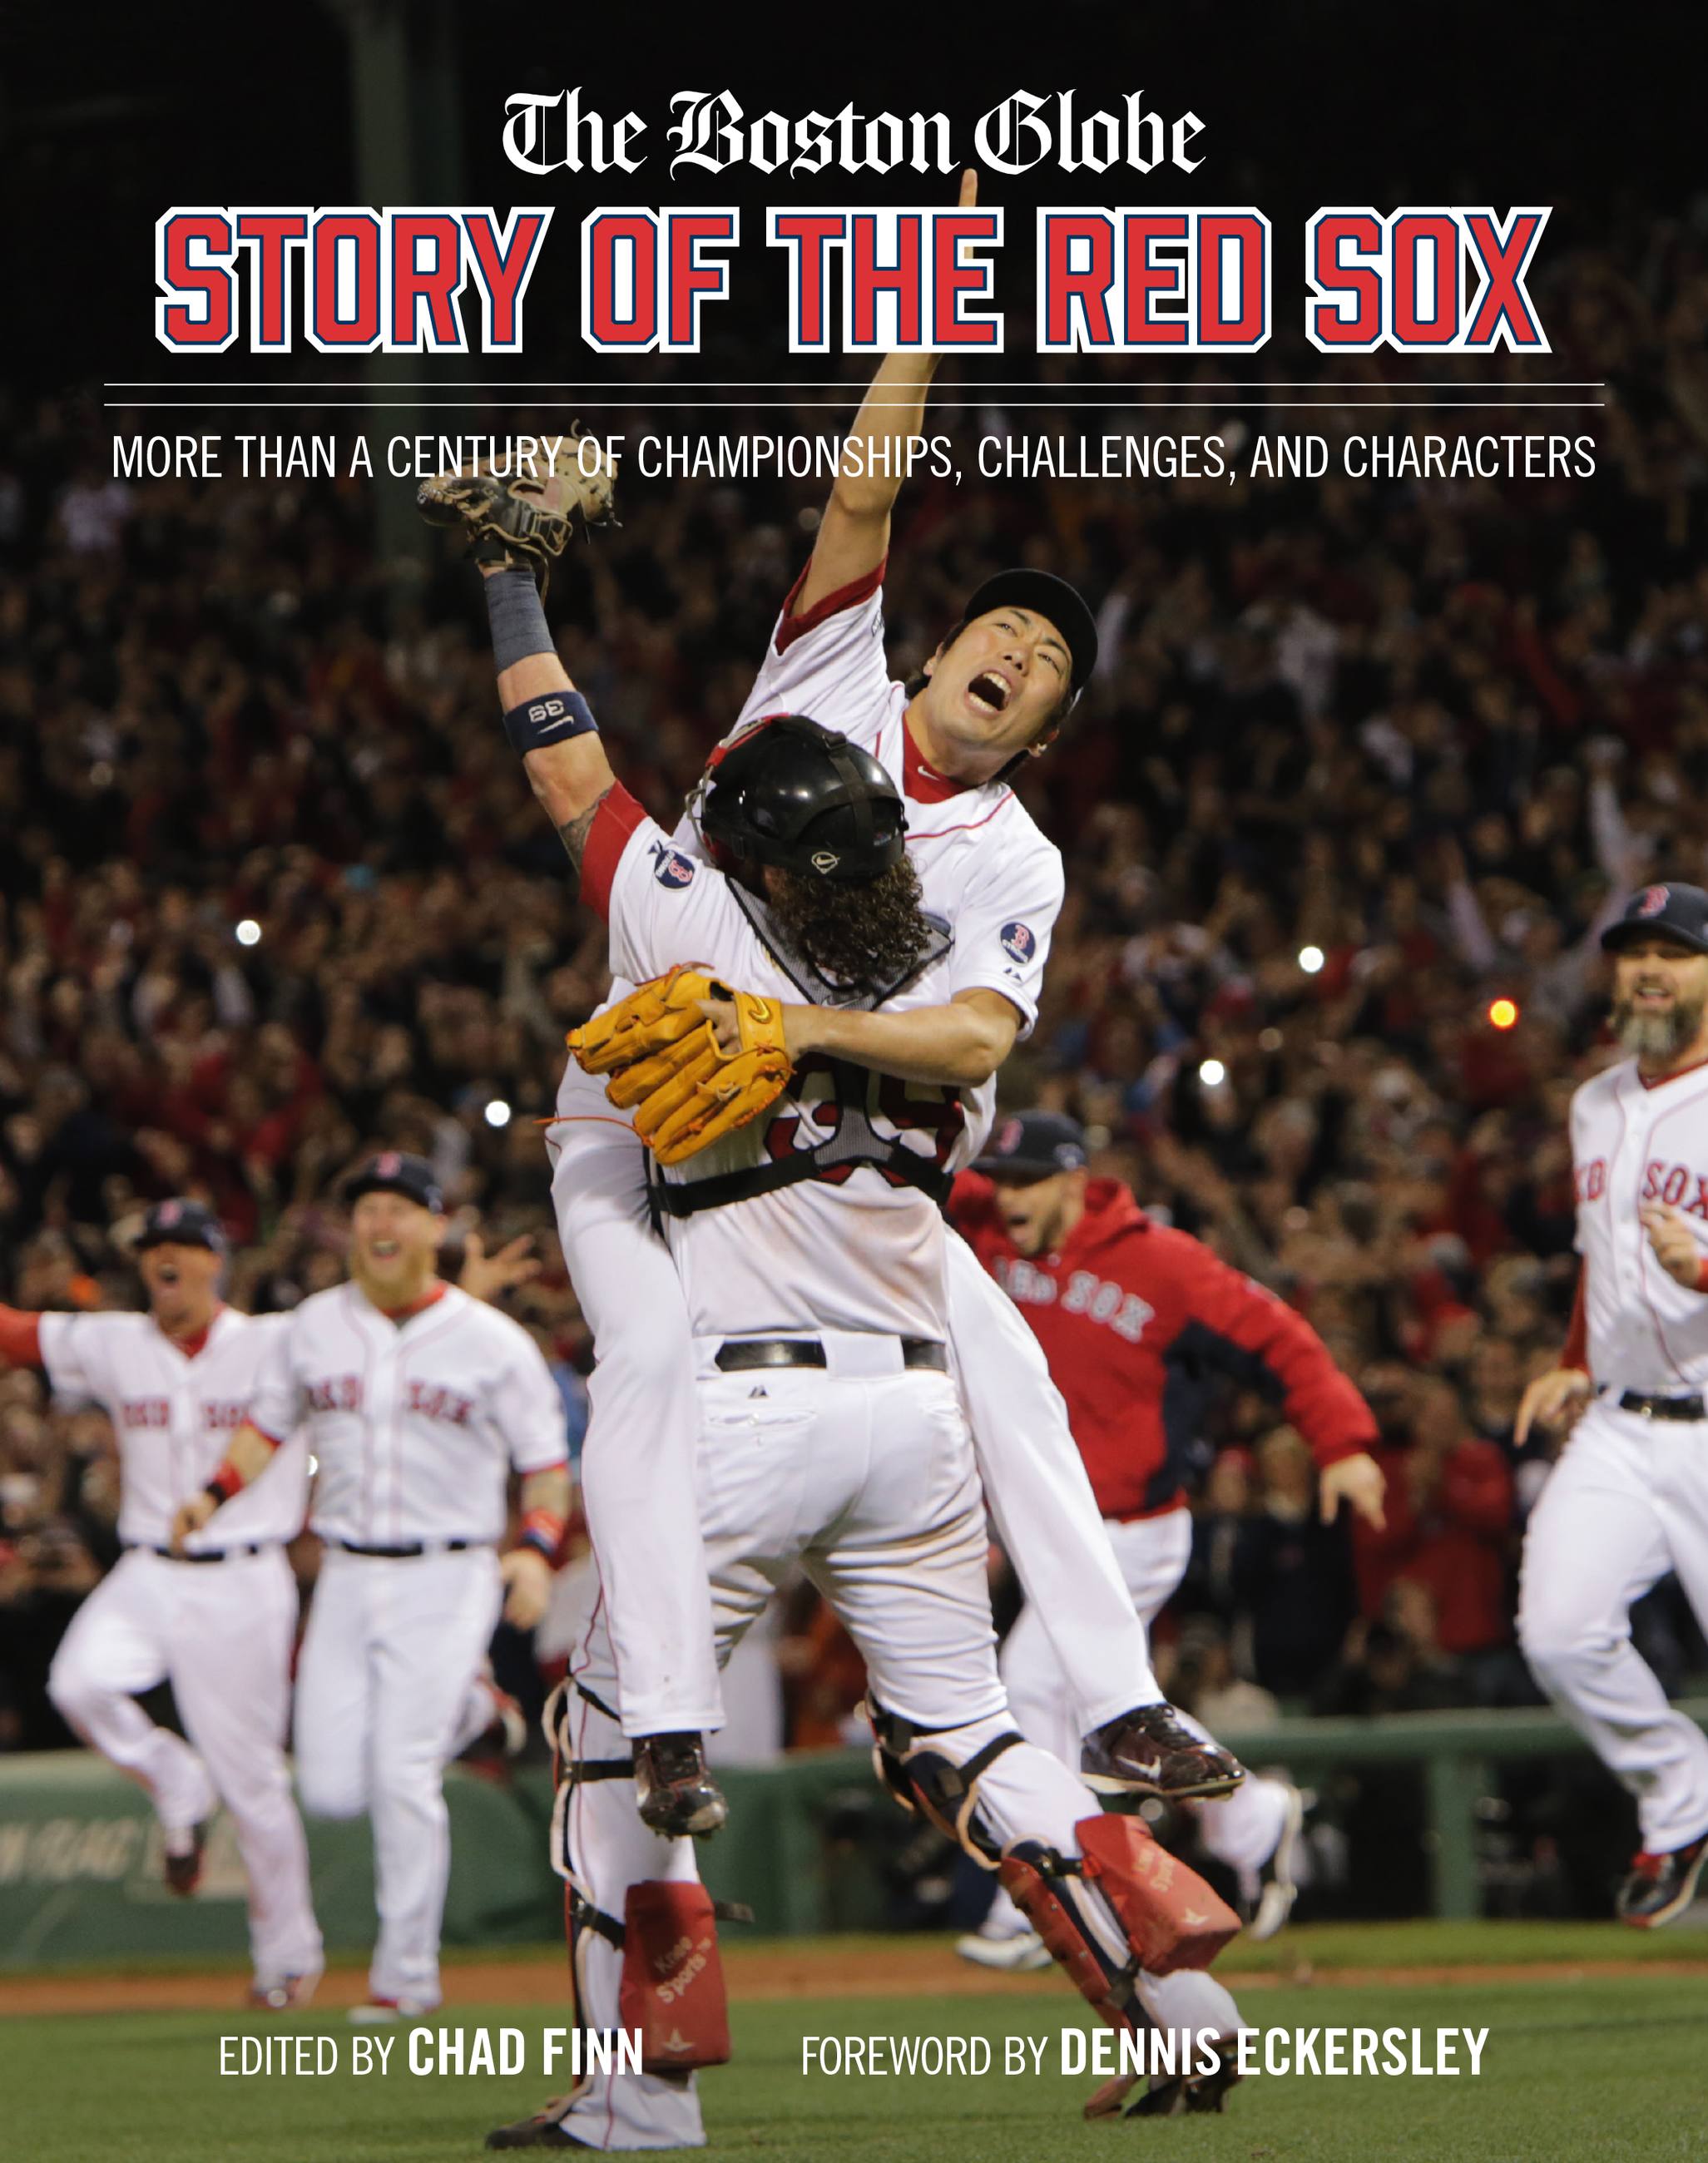 The Boston Globe Story of the Red Sox by The Boston Globe Hachette Book Group